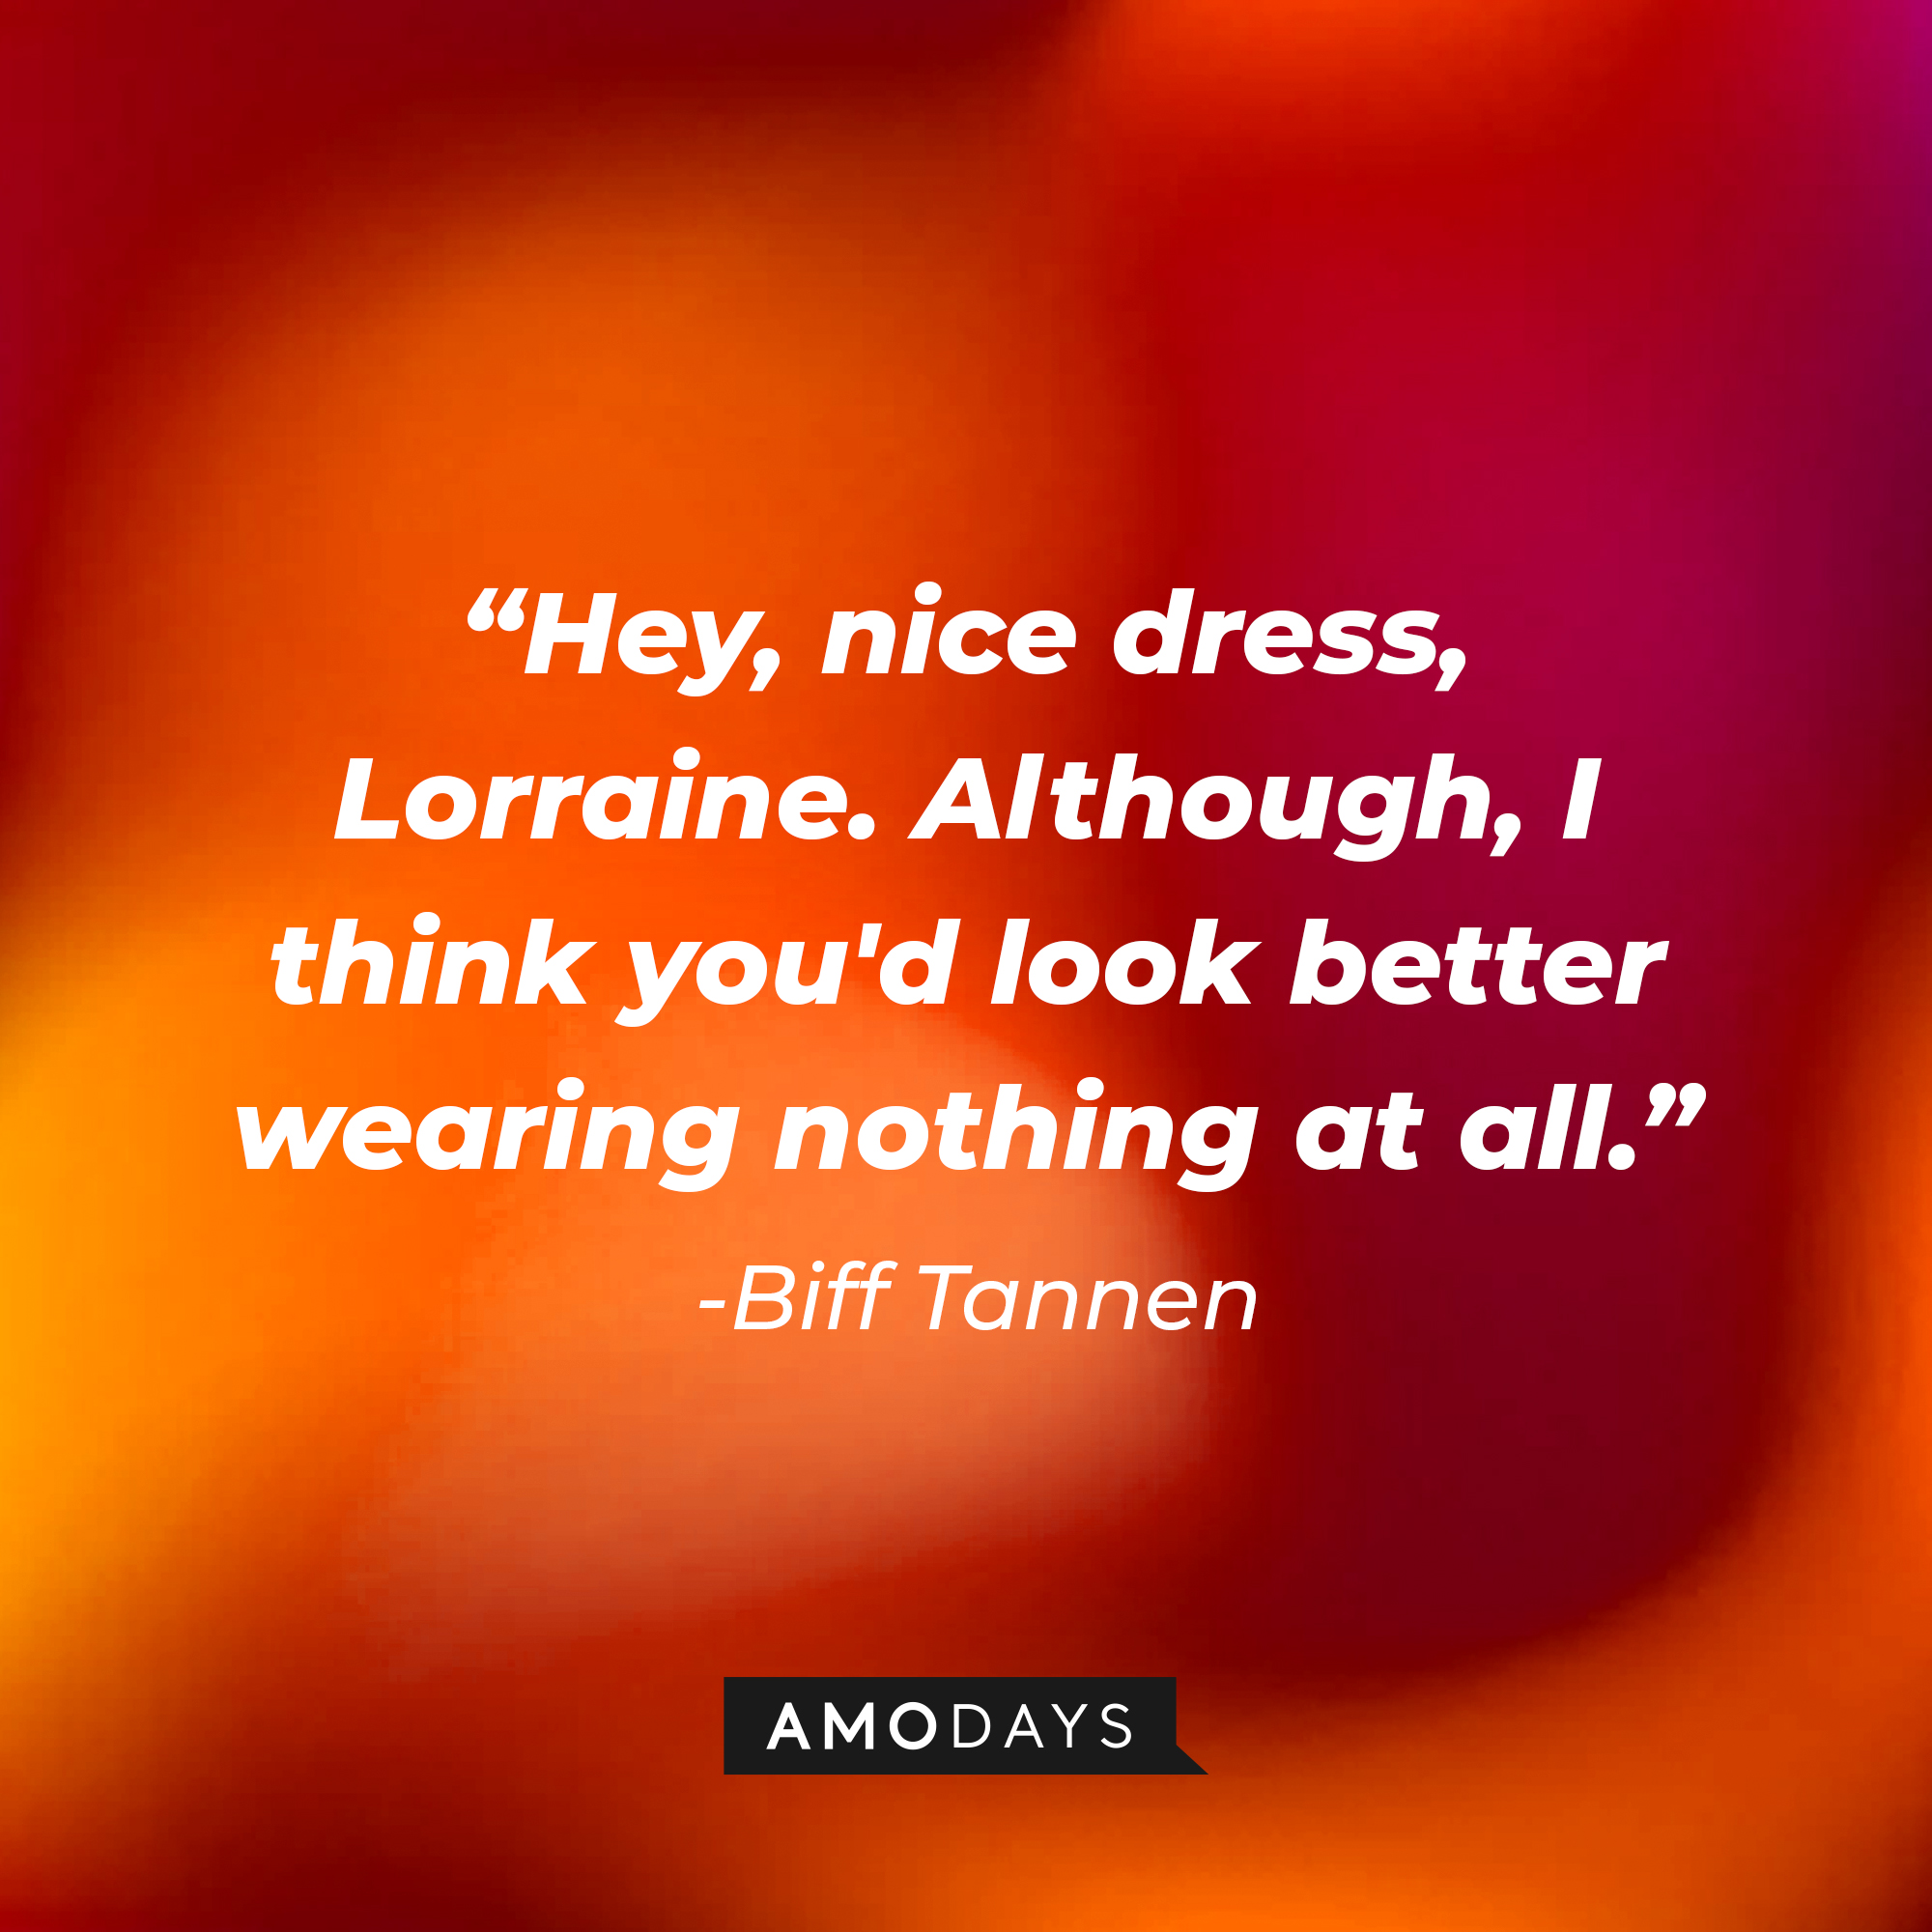 Biff Tannen’s quote: “Hey, nice dress, Lorraine. Although, I think you'd look better wearing nothing at all.” | Source: AmoDays